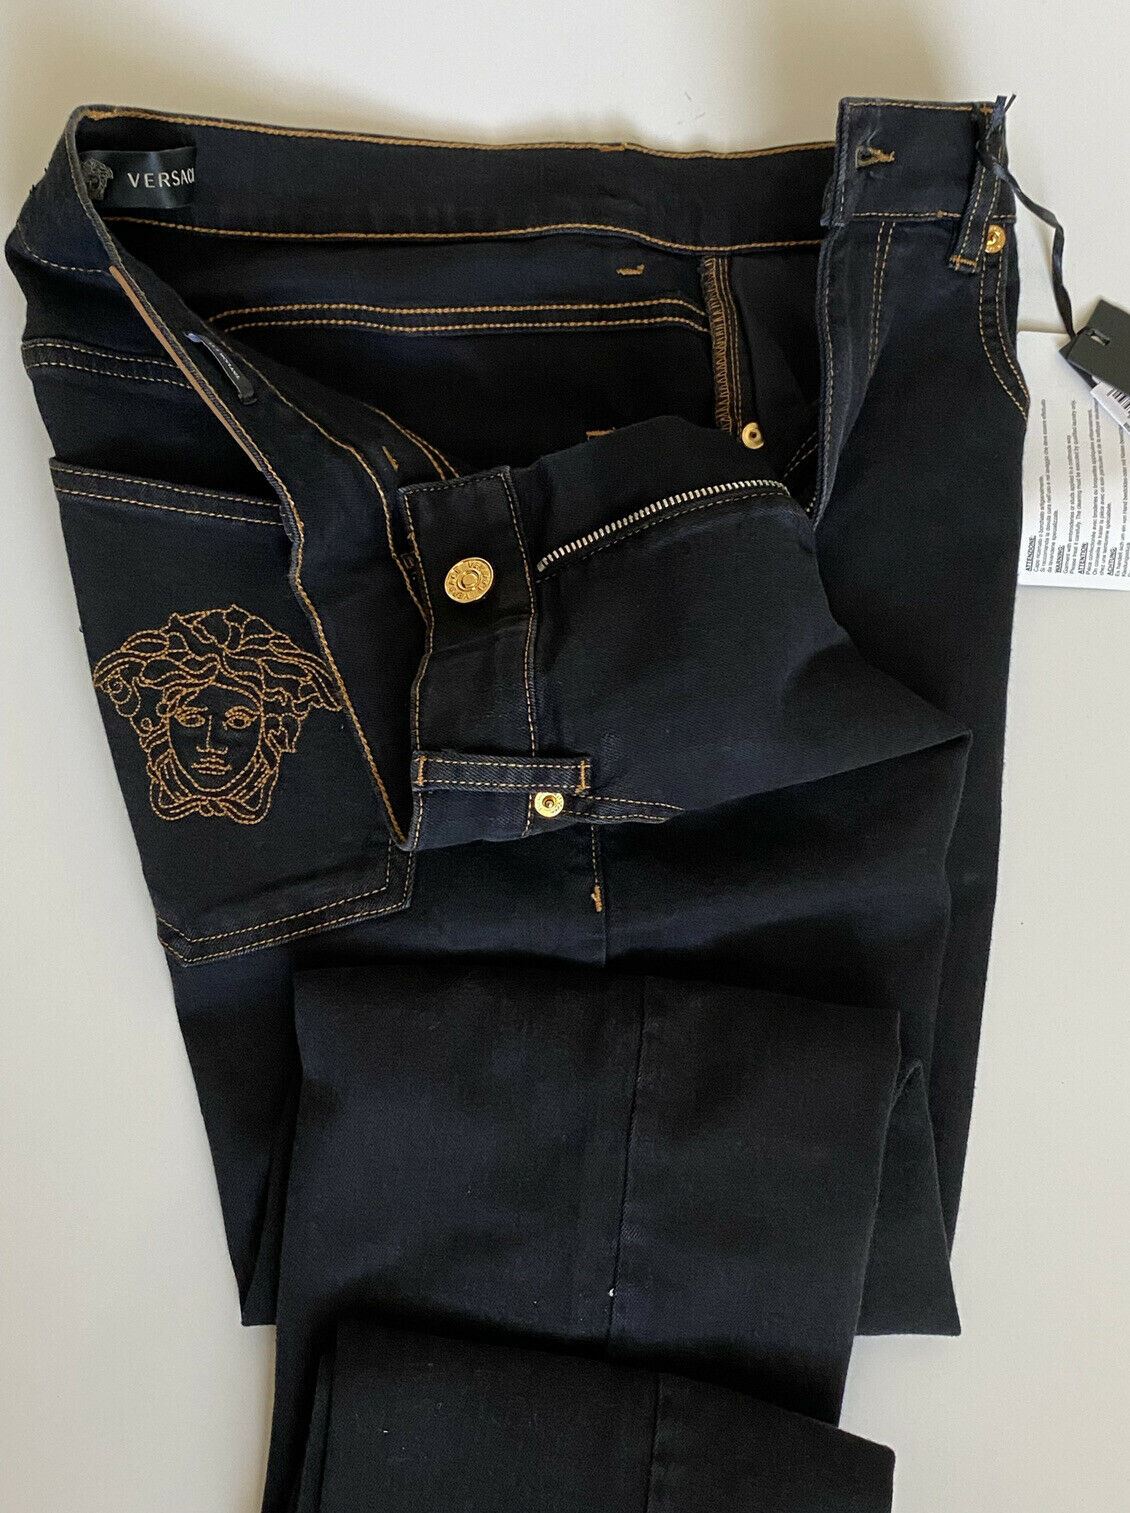 NWT $450 Versace Men's Denim Black Jeans Size 33 US A84998S Made in Italy